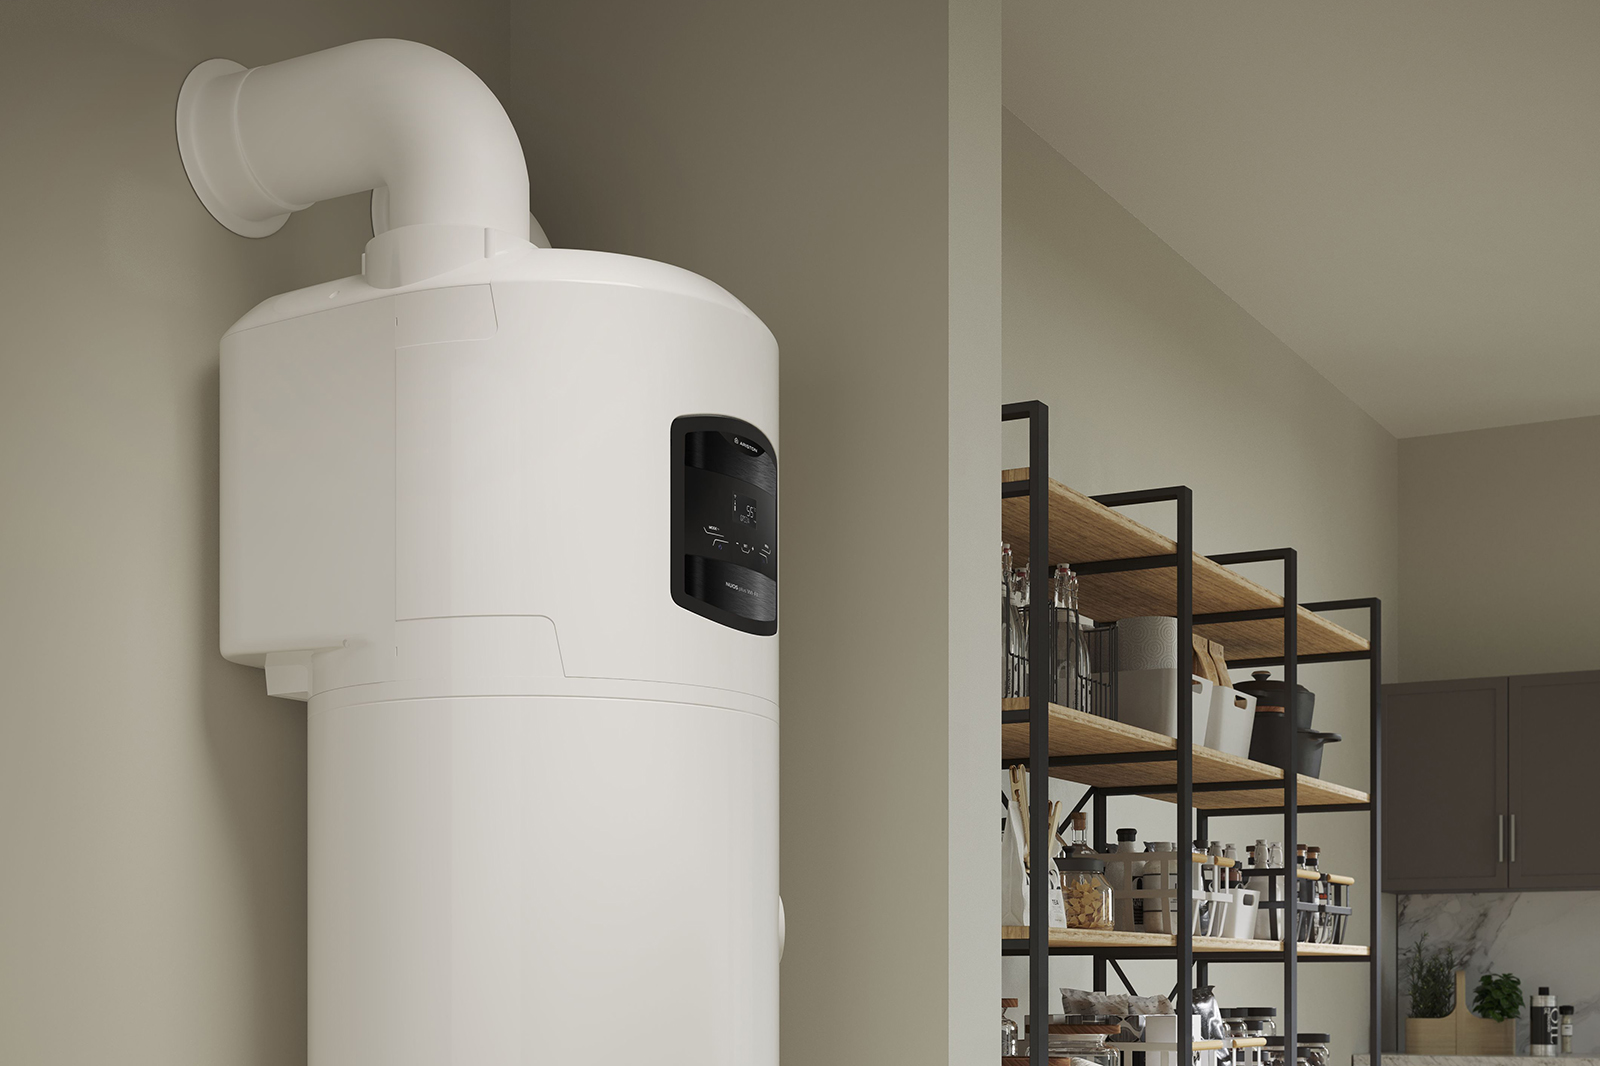 Integrating heat pump water heaters with gas boilers